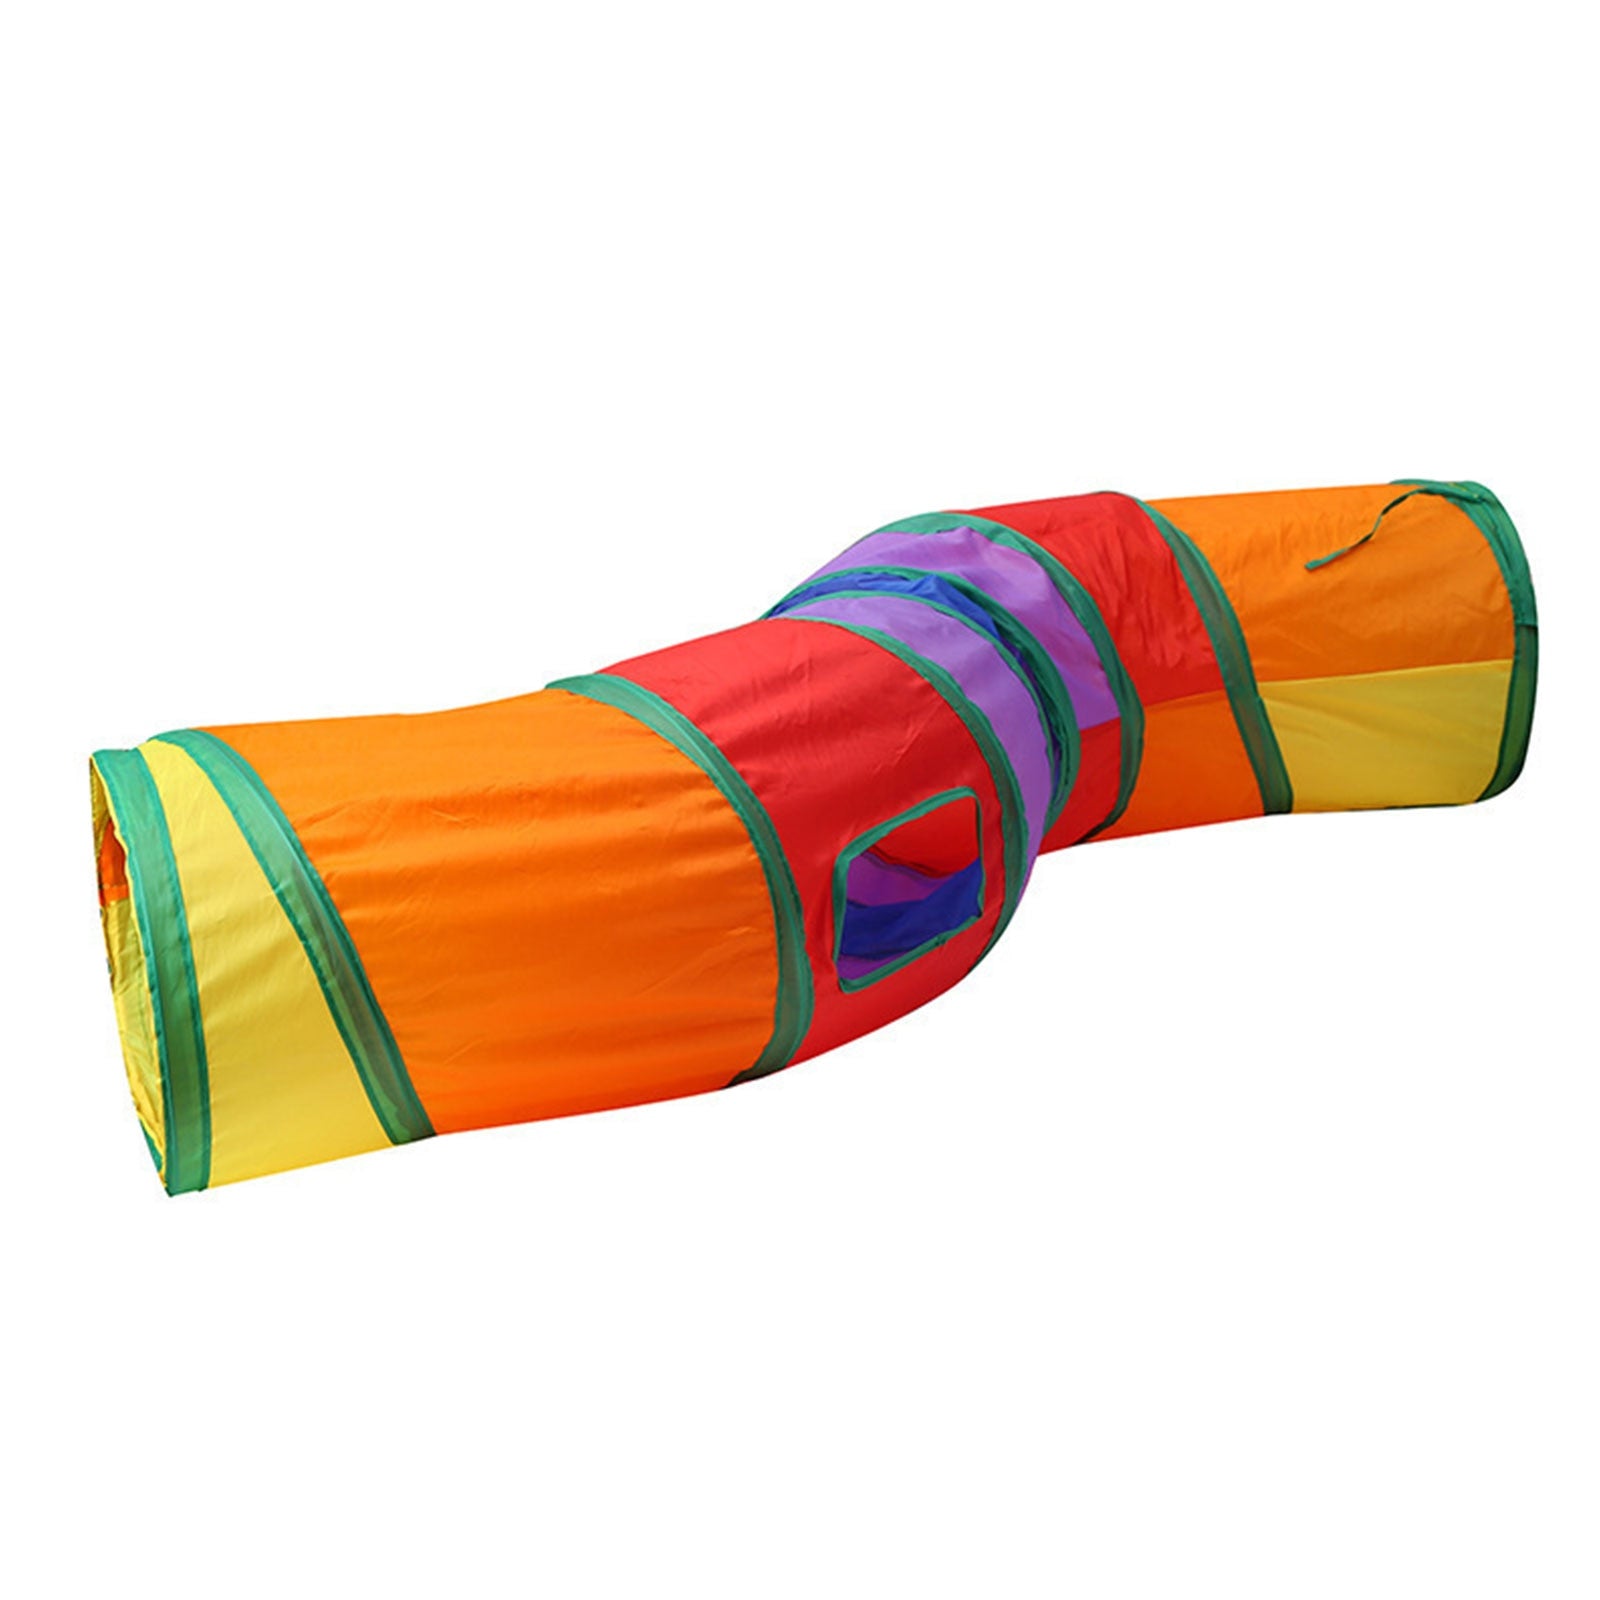 Cats Hideout Tunnels Rainbow Foldable Polyester Pets Training Interactive Fun Toy Tunnel With Hanging Ball Pet Self-playing Toy - thepetsupplyhaven